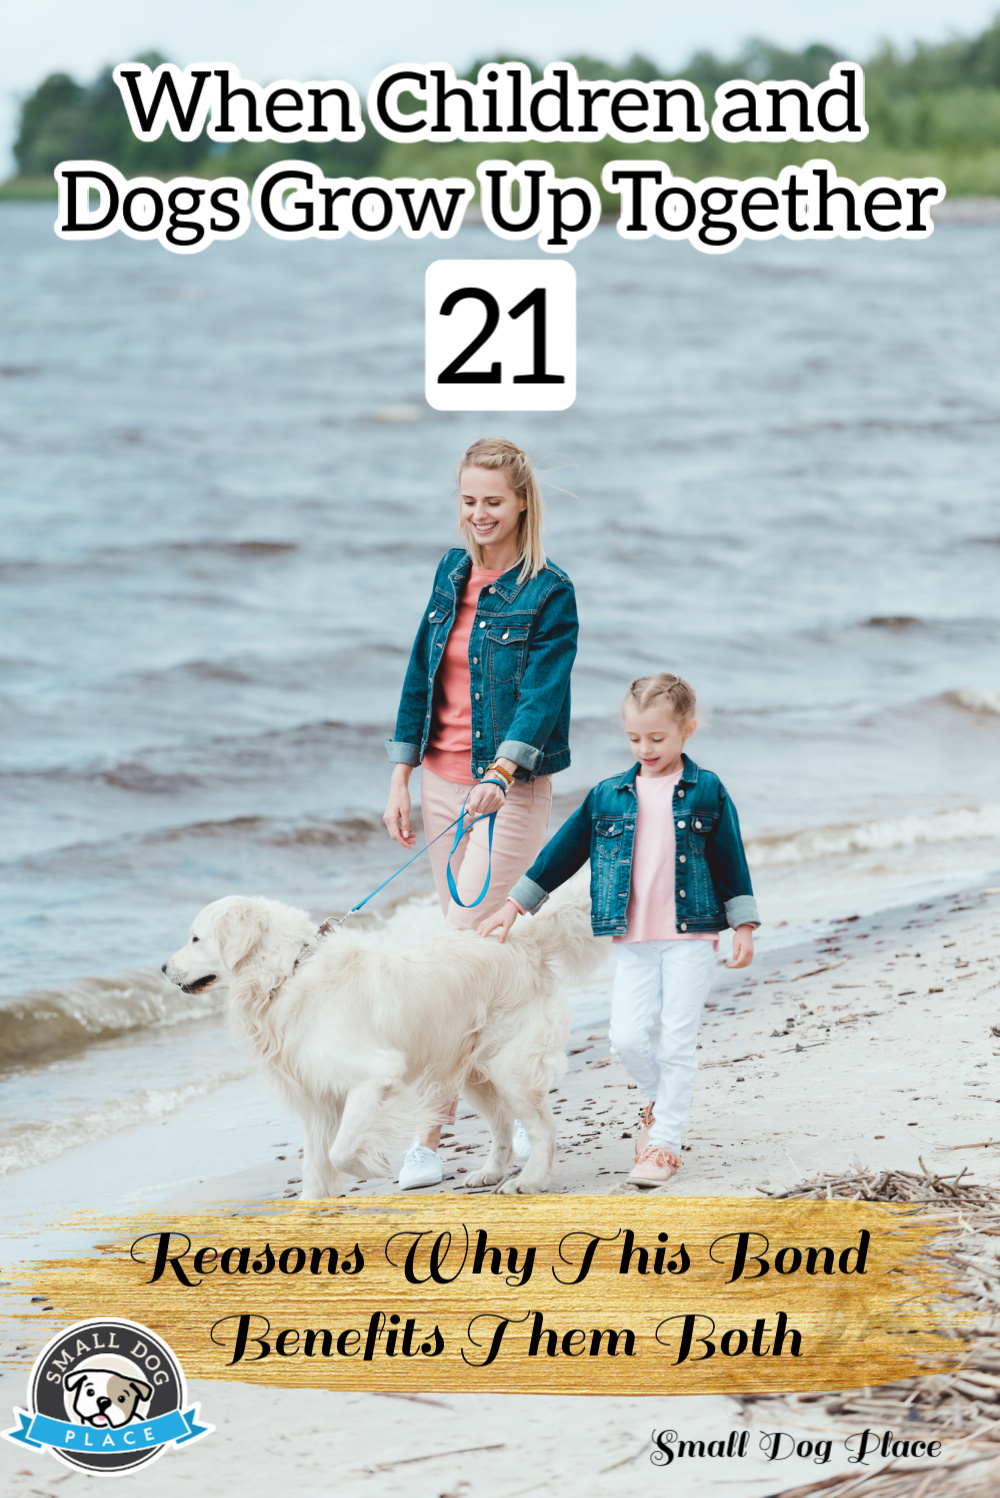 When Children and Dogs Grow Up Together:  21 Reasons Why This Bond Benefits Them Both. (Pin)